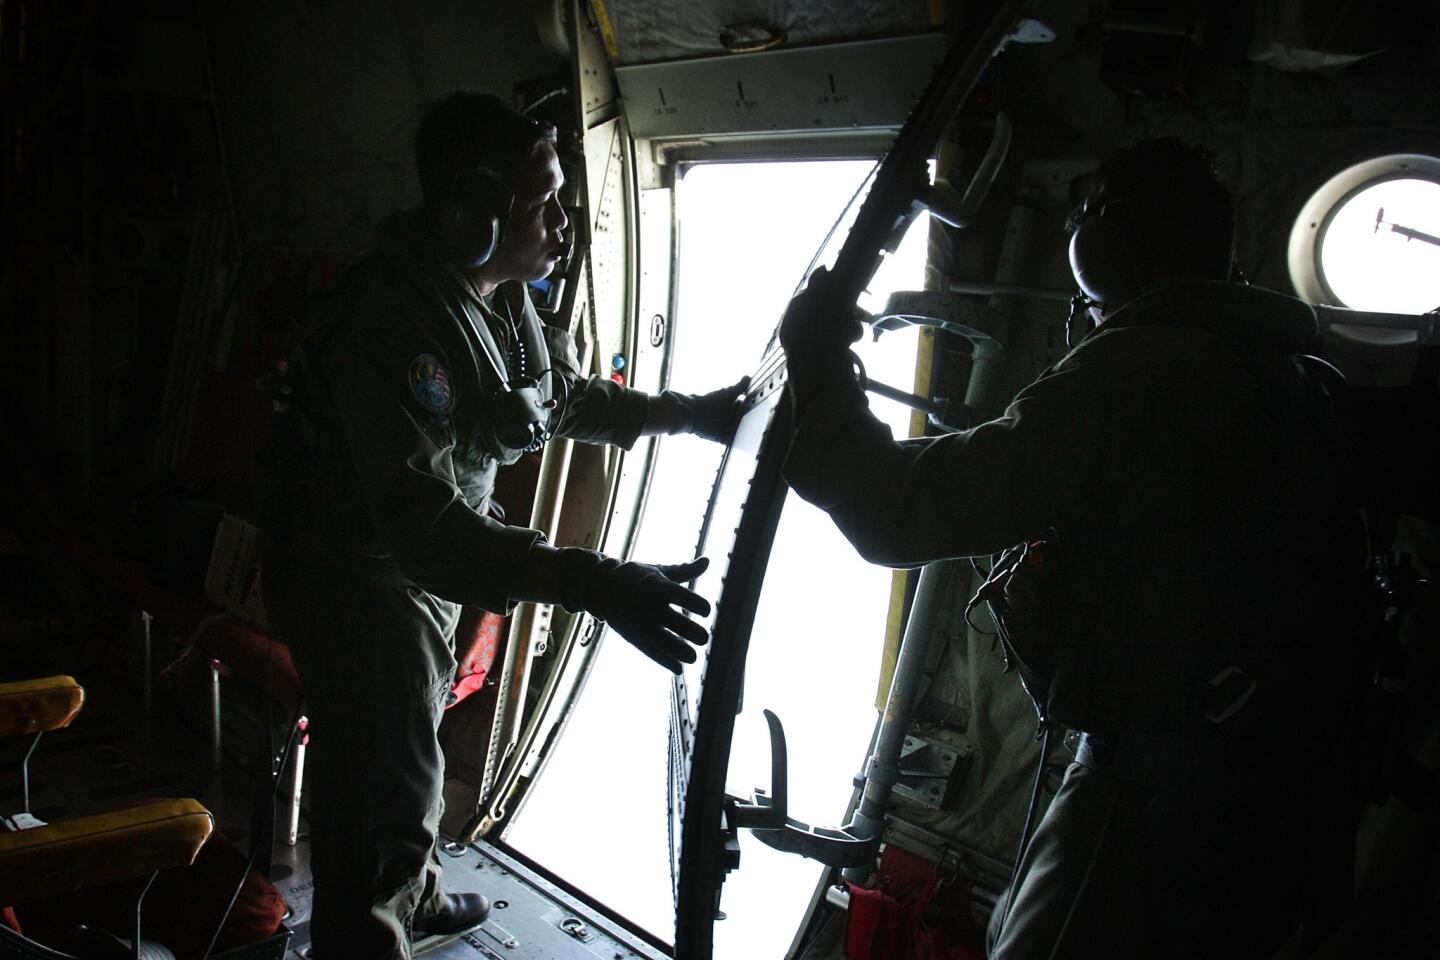 Sgt. Zulhelmi Hassan (R) and Sgt. Zul Fahmy (L) of the Malaysian Air Forces close the door for a search and rescue mission flight in Kuala Lumpur, Malaysia.